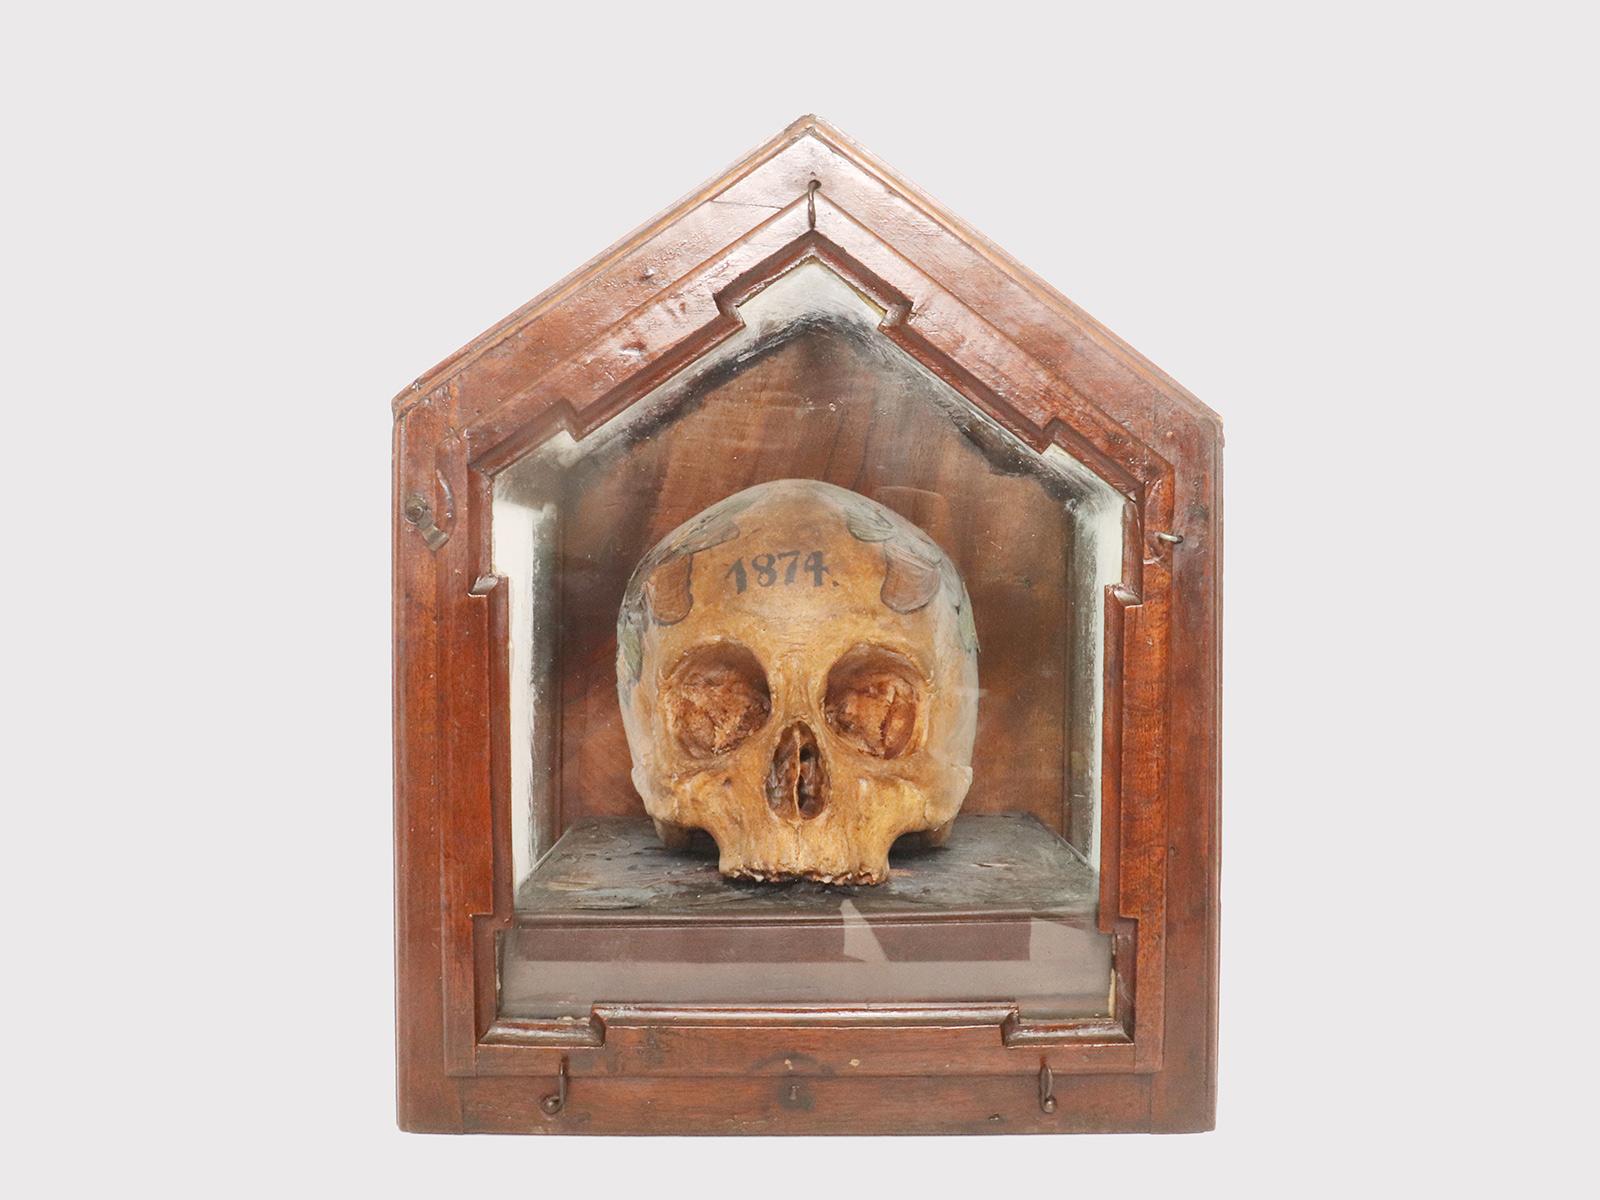 A Memento Mori from Wunderkammer, depicting a skull, plaster cast covered with butterfly wings, applied to the crown-shaped skull and to the mosaic-type wooden base. The year 1874 is painted on the forehead of the skull. Everything is kept inside a